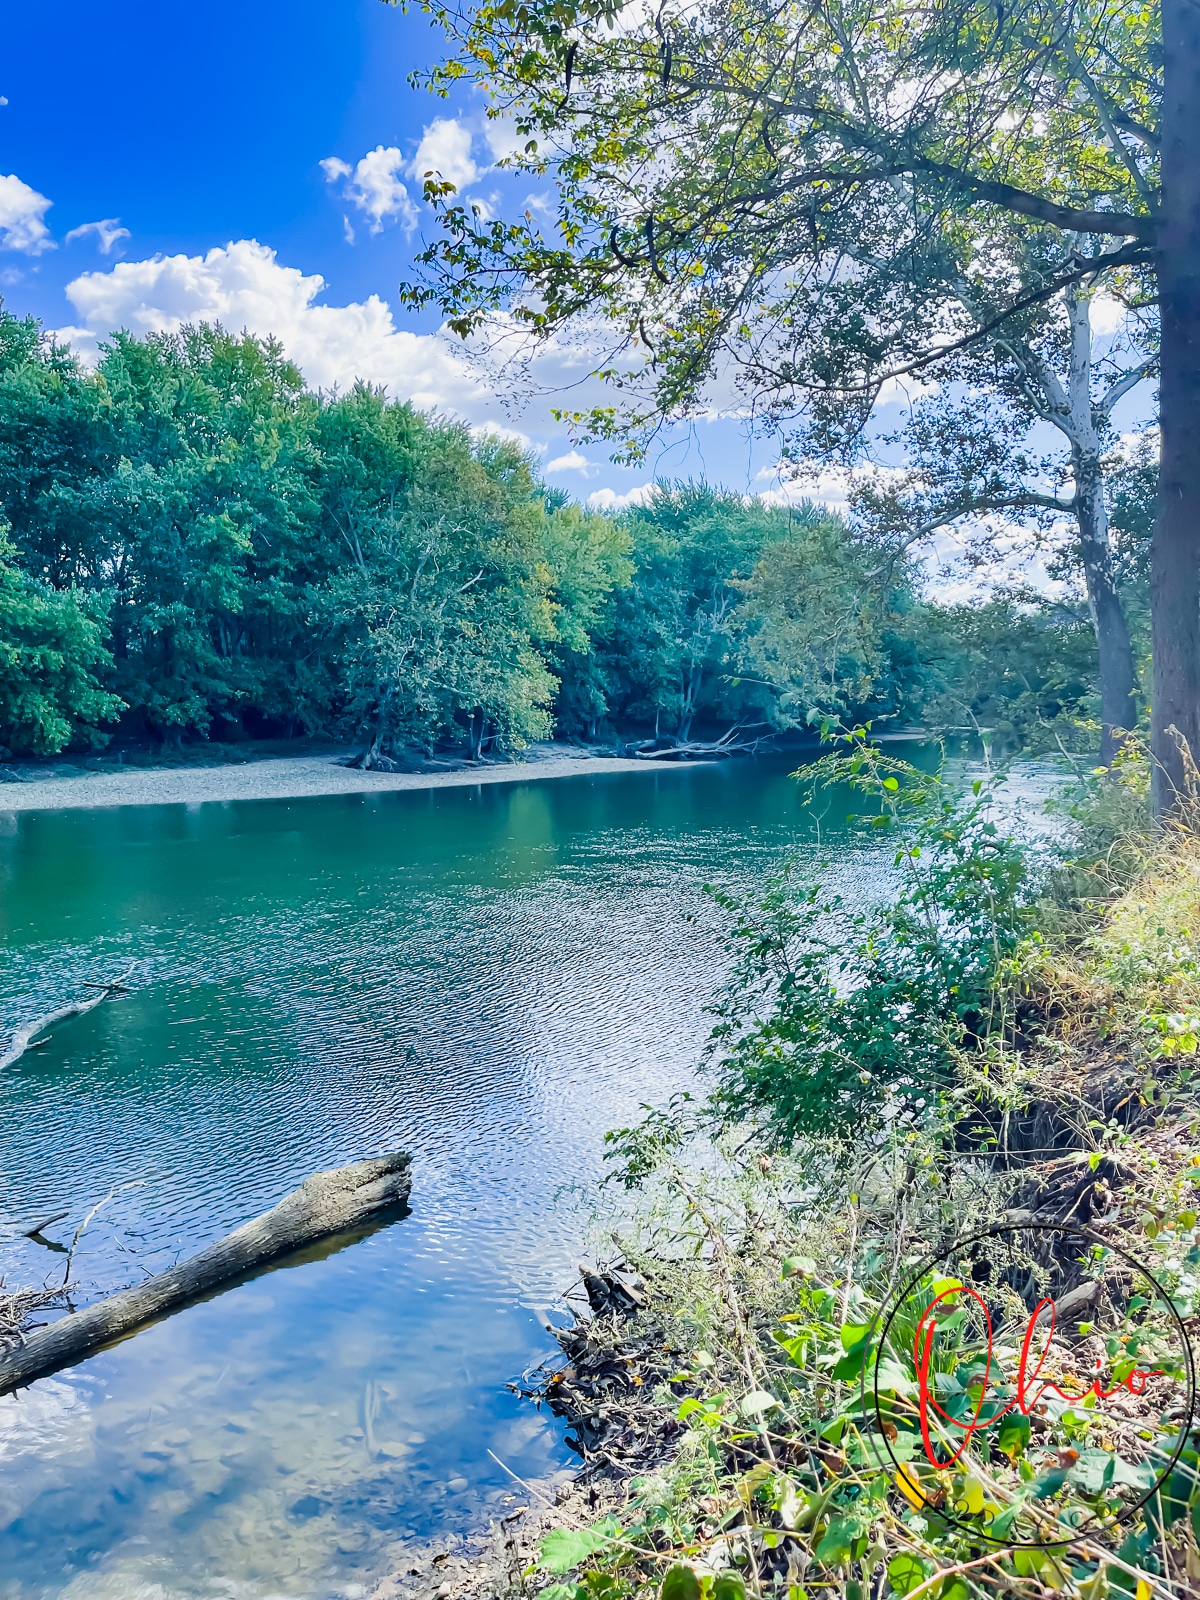 picture of a blue river with blue sky and white clouds and green trees in background